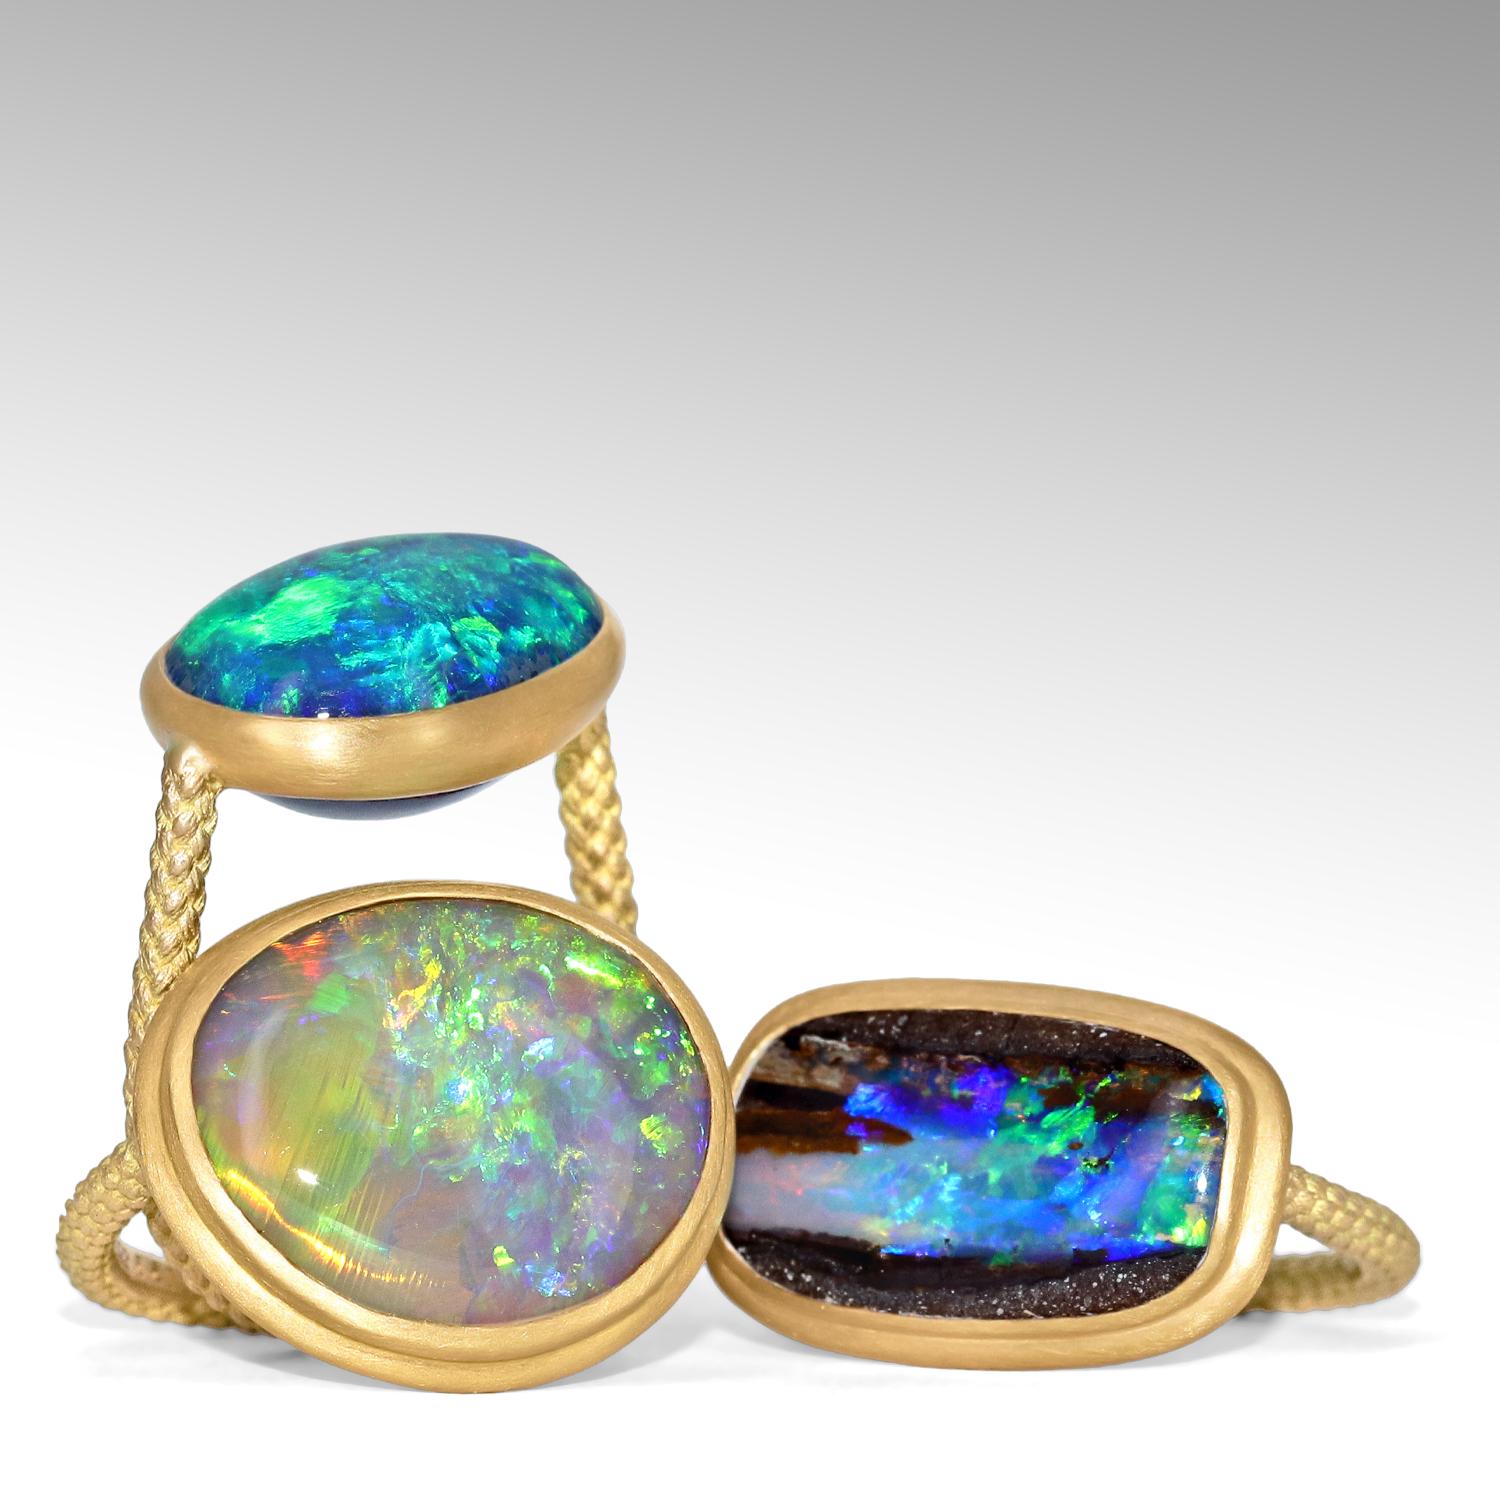 One of a Kind Editions Ring hand-fabricated in Japan by jewelry designer Shinobu Marotta (Talkative Atelier) showcasing an extraordinary 5.61 carat crystal semi black opal from the coveted Lightning Ridge mine in Australia, framed and bezel-set in